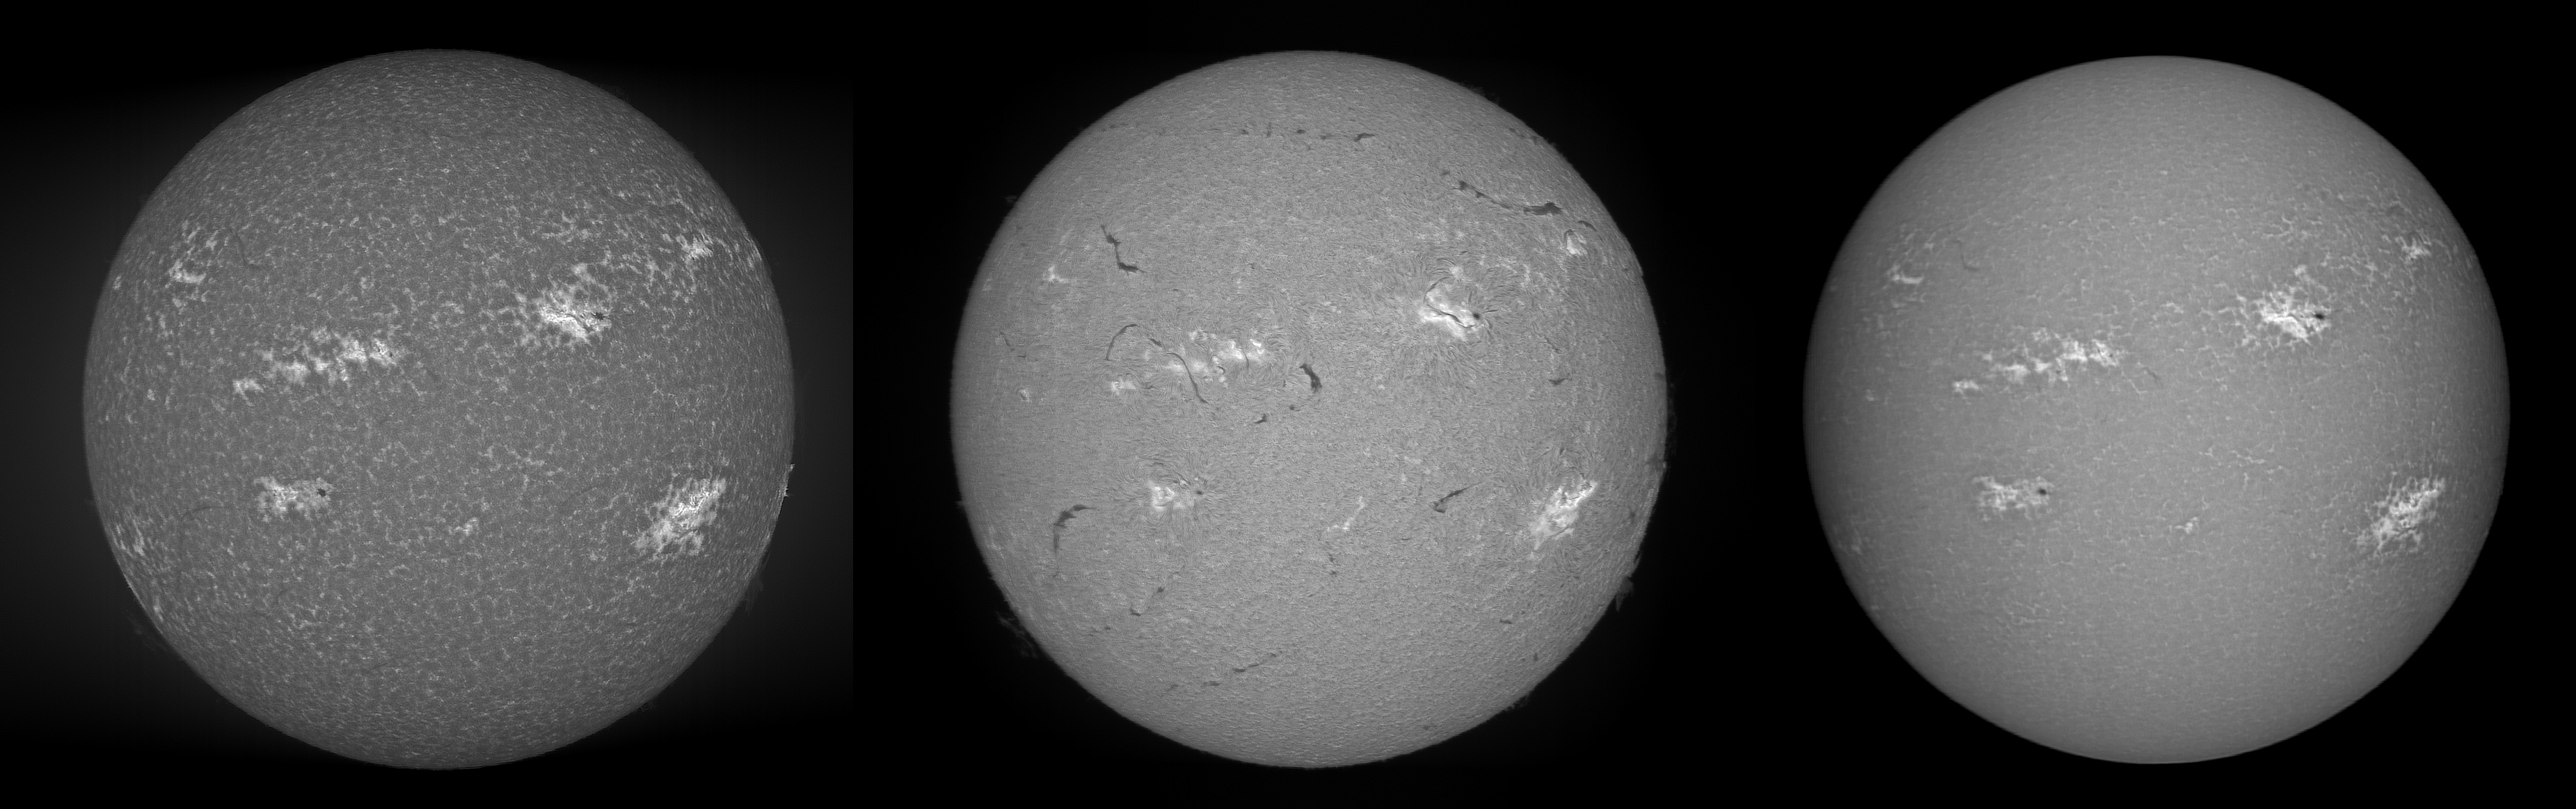 Ca-H (left), H-alpha (centre) and Ca-IR [854.2nm] (right). All taken at 480mm focal length, 80mm aperture. H-alpha taken with 2400 l/mm grating, other two with 1800 l/mm.